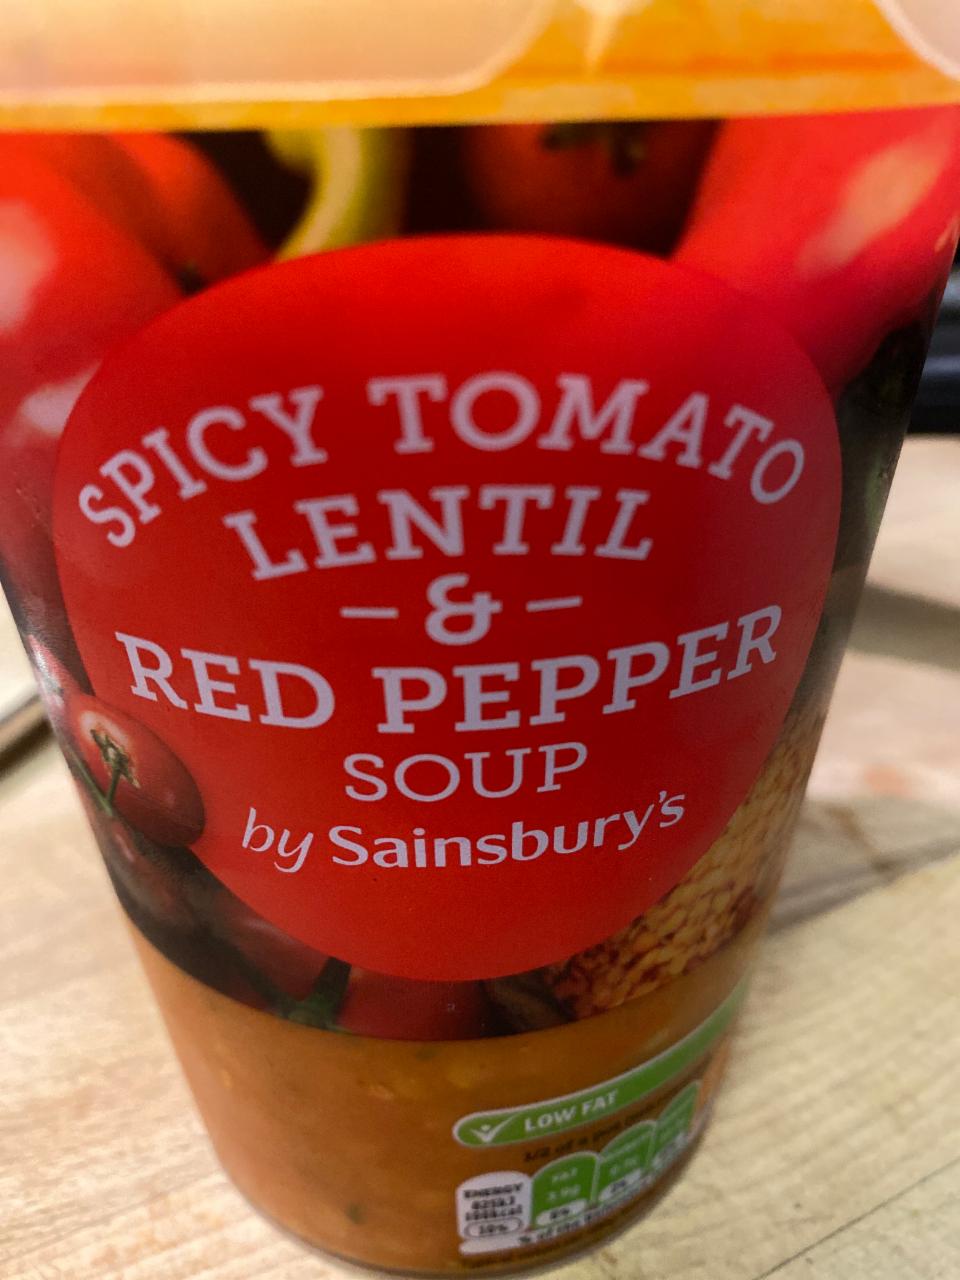 Zdjęcia - Spicy Tomato Lentil & Red Pepper Soup by Sainsbury's